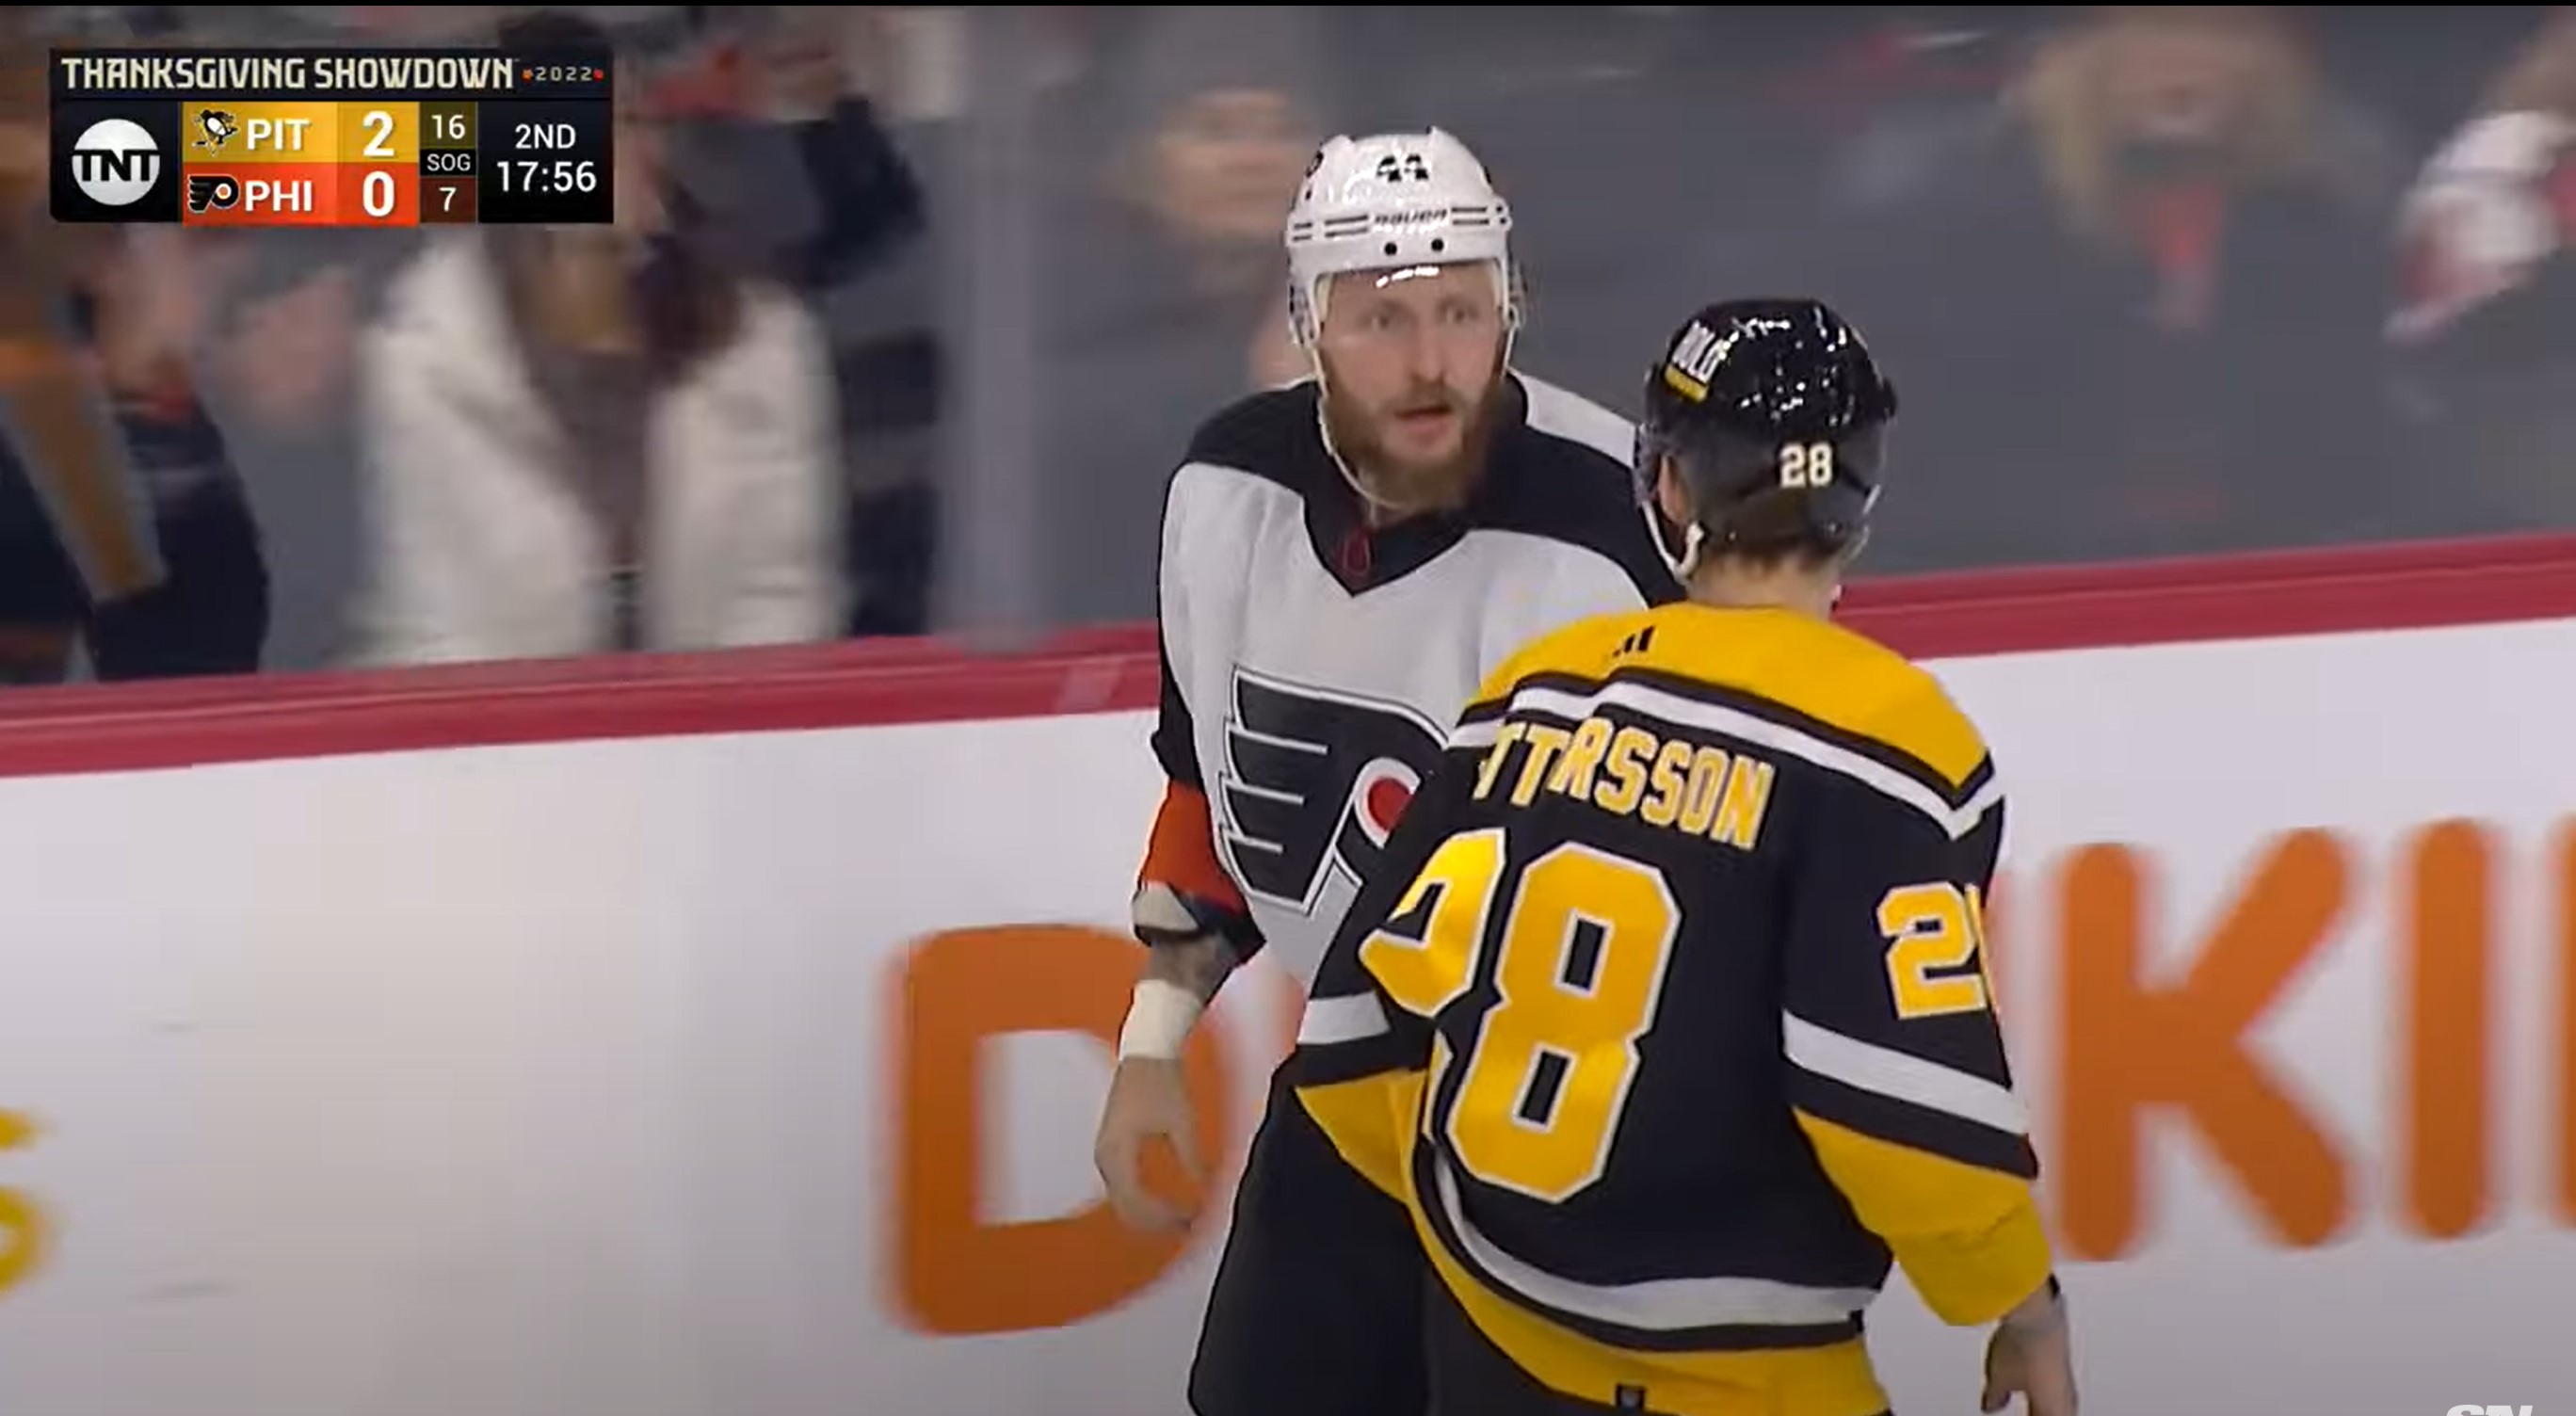 Why does Penguins defenseman Marcus Pettersson keep getting into